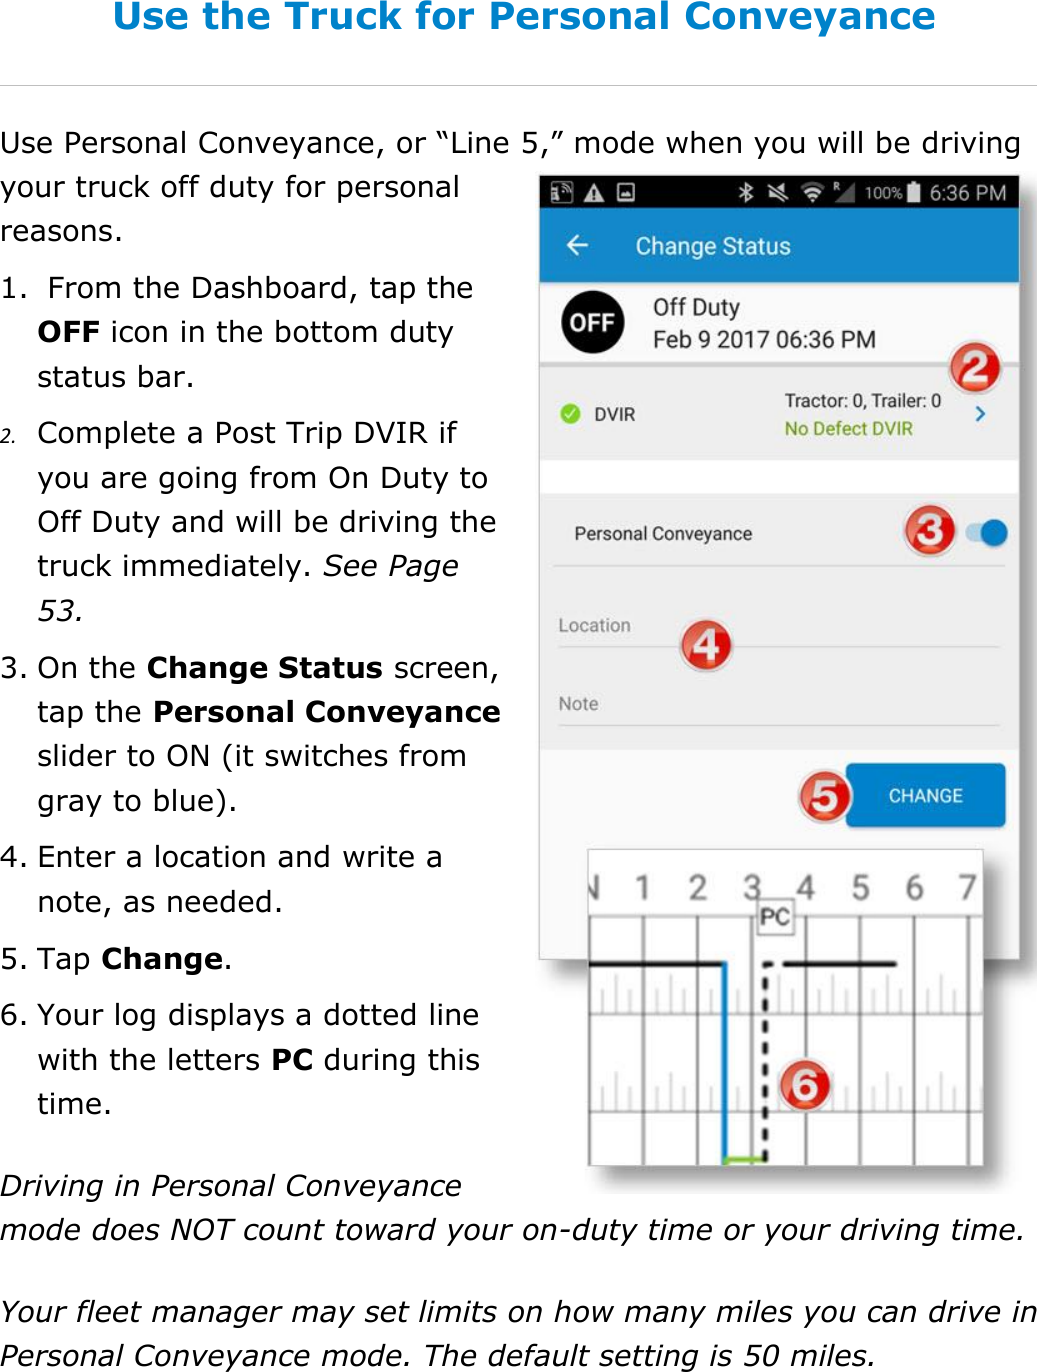 Set My Duty Status DriverConnect User Guide  38 © 2016-2017, Rand McNally, Inc. Use the Truck for Personal Conveyance Use Personal Conveyance, or “Line 5,” mode when you will be driving your truck off duty for personal reasons. 1.  From the Dashboard, tap the OFF icon in the bottom duty status bar. 2. Complete a Post Trip DVIR if you are going from On Duty to Off Duty and will be driving the truck immediately. See Page 53. 3. On the Change Status screen, tap the Personal Conveyance slider to ON (it switches from gray to blue). 4. Enter a location and write a note, as needed. 5. Tap Change. 6. Your log displays a dotted line with the letters PC during this time. Driving in Personal Conveyance mode does NOT count toward your on-duty time or your driving time. Your fleet manager may set limits on how many miles you can drive in Personal Conveyance mode. The default setting is 50 miles. 